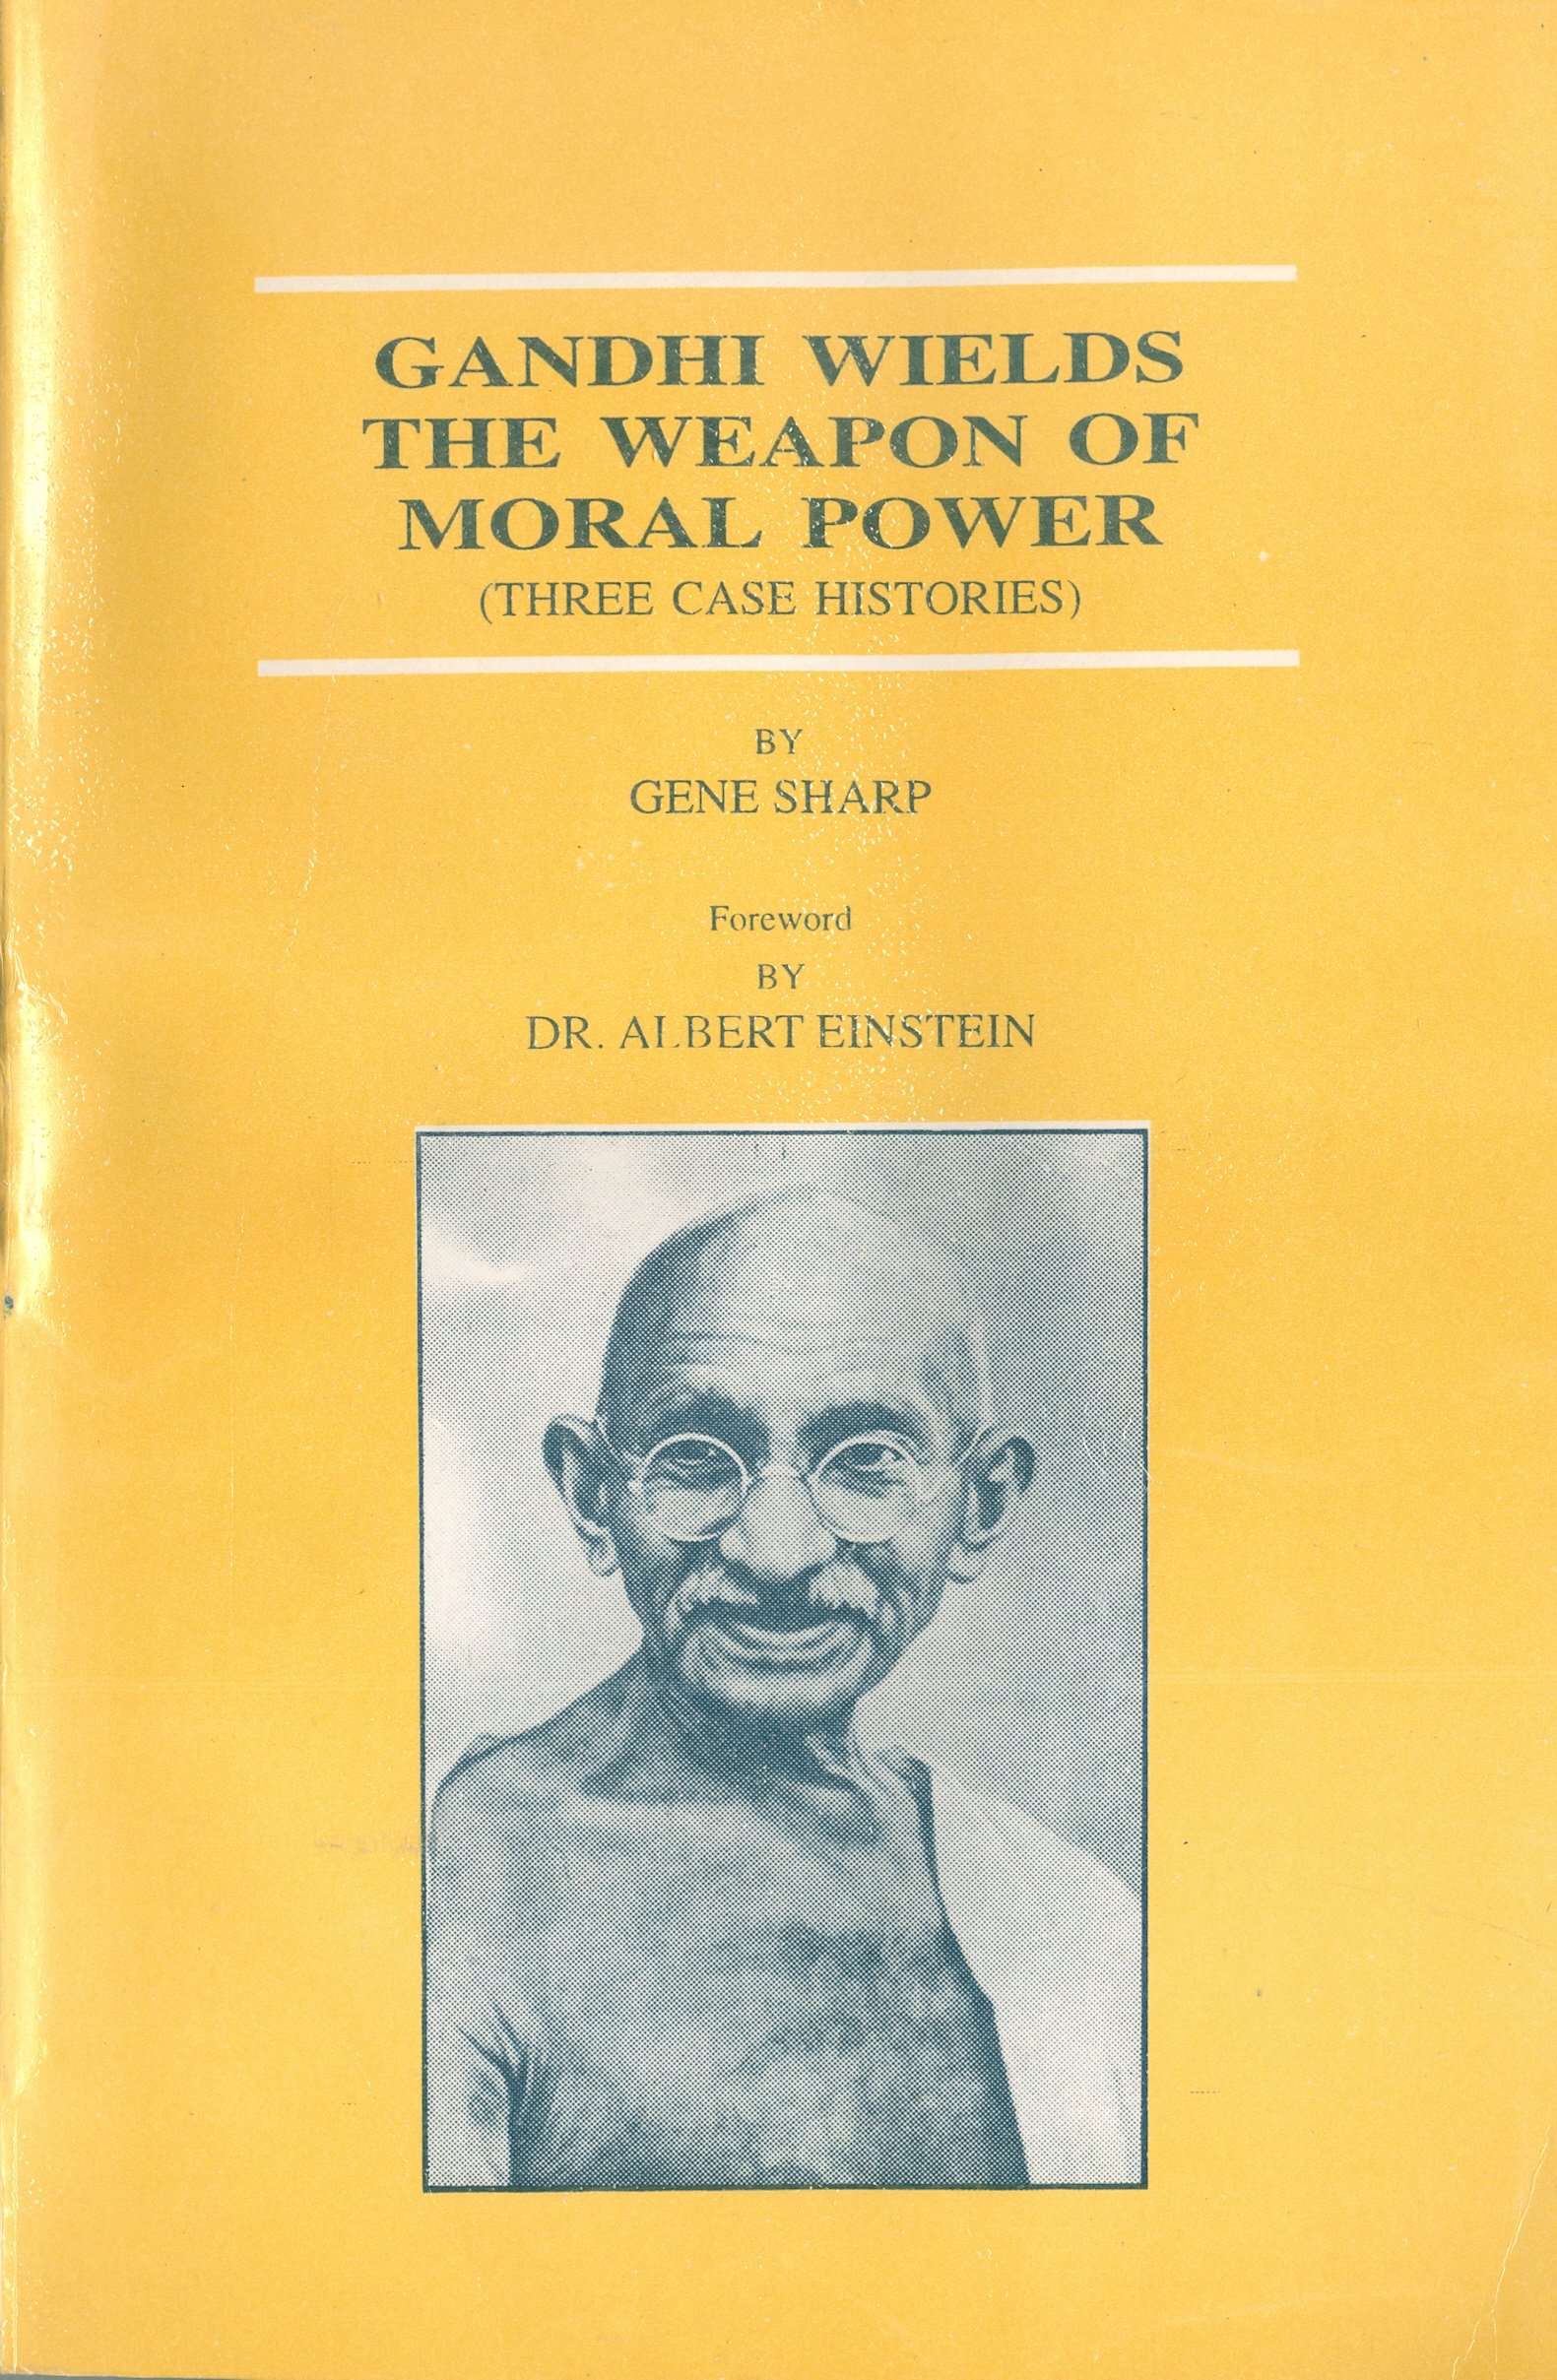 Gandhi wields the weapon of Moral Power